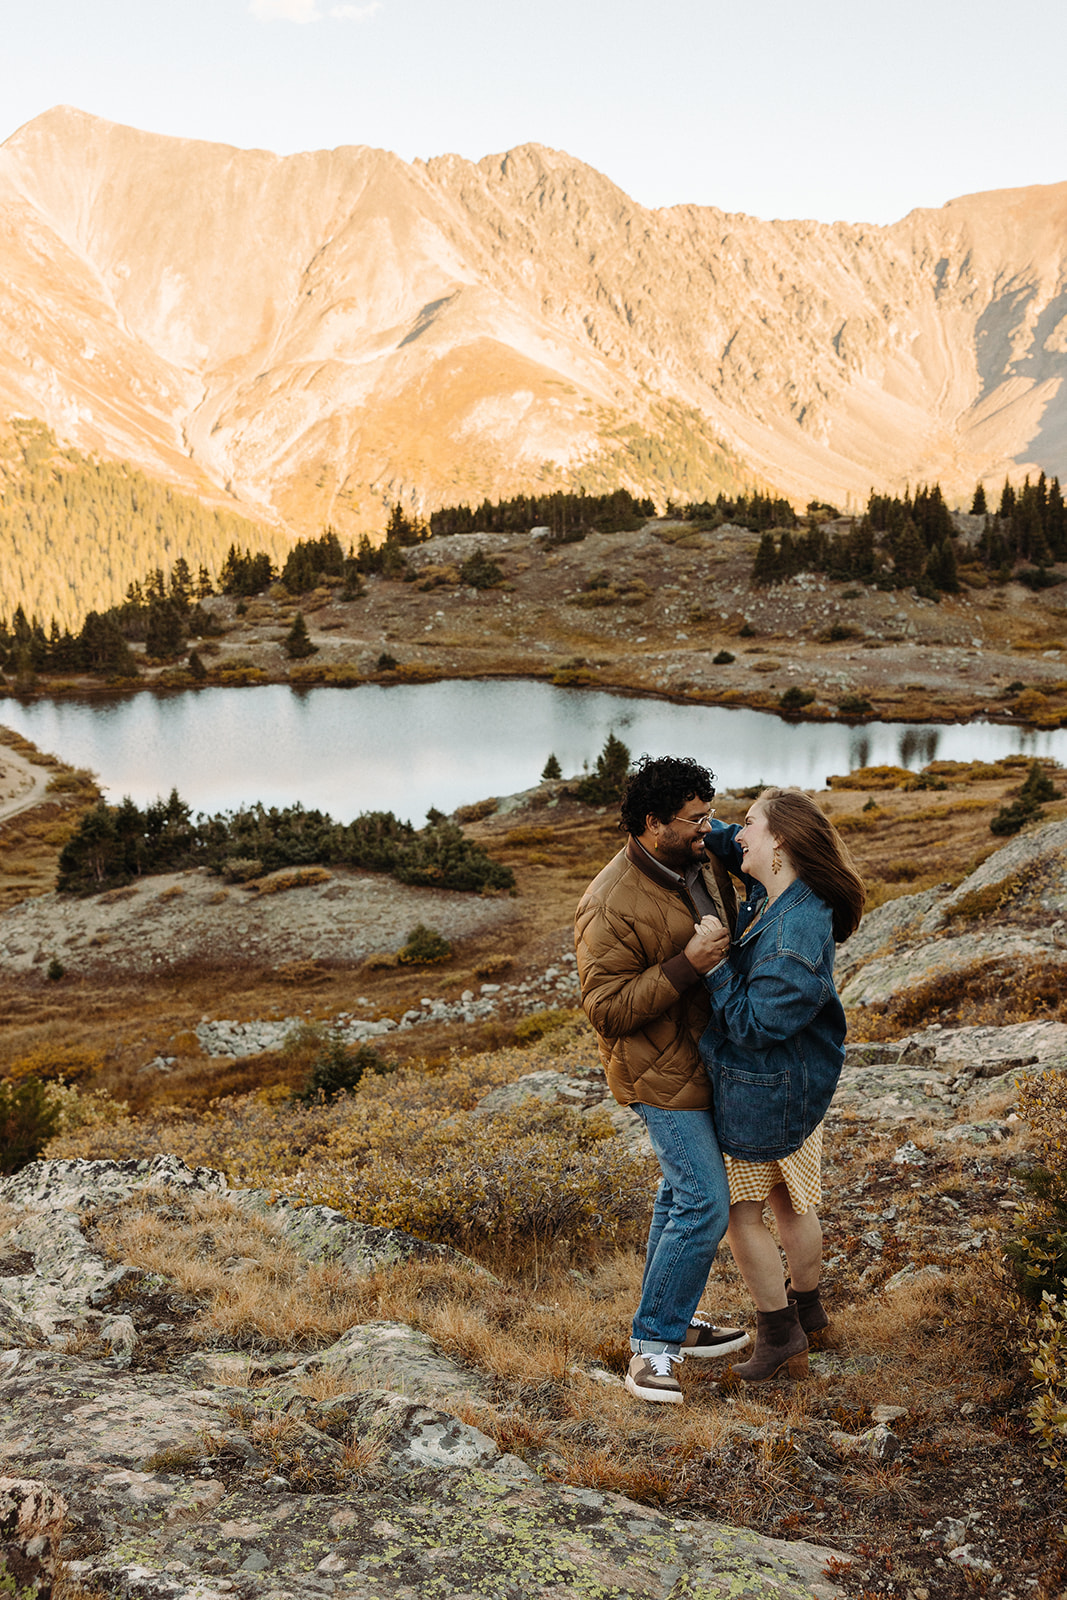 The man, in his brown puffy jacket and blue jeans, holds his fiance in the grassy valley of the towering mountains.